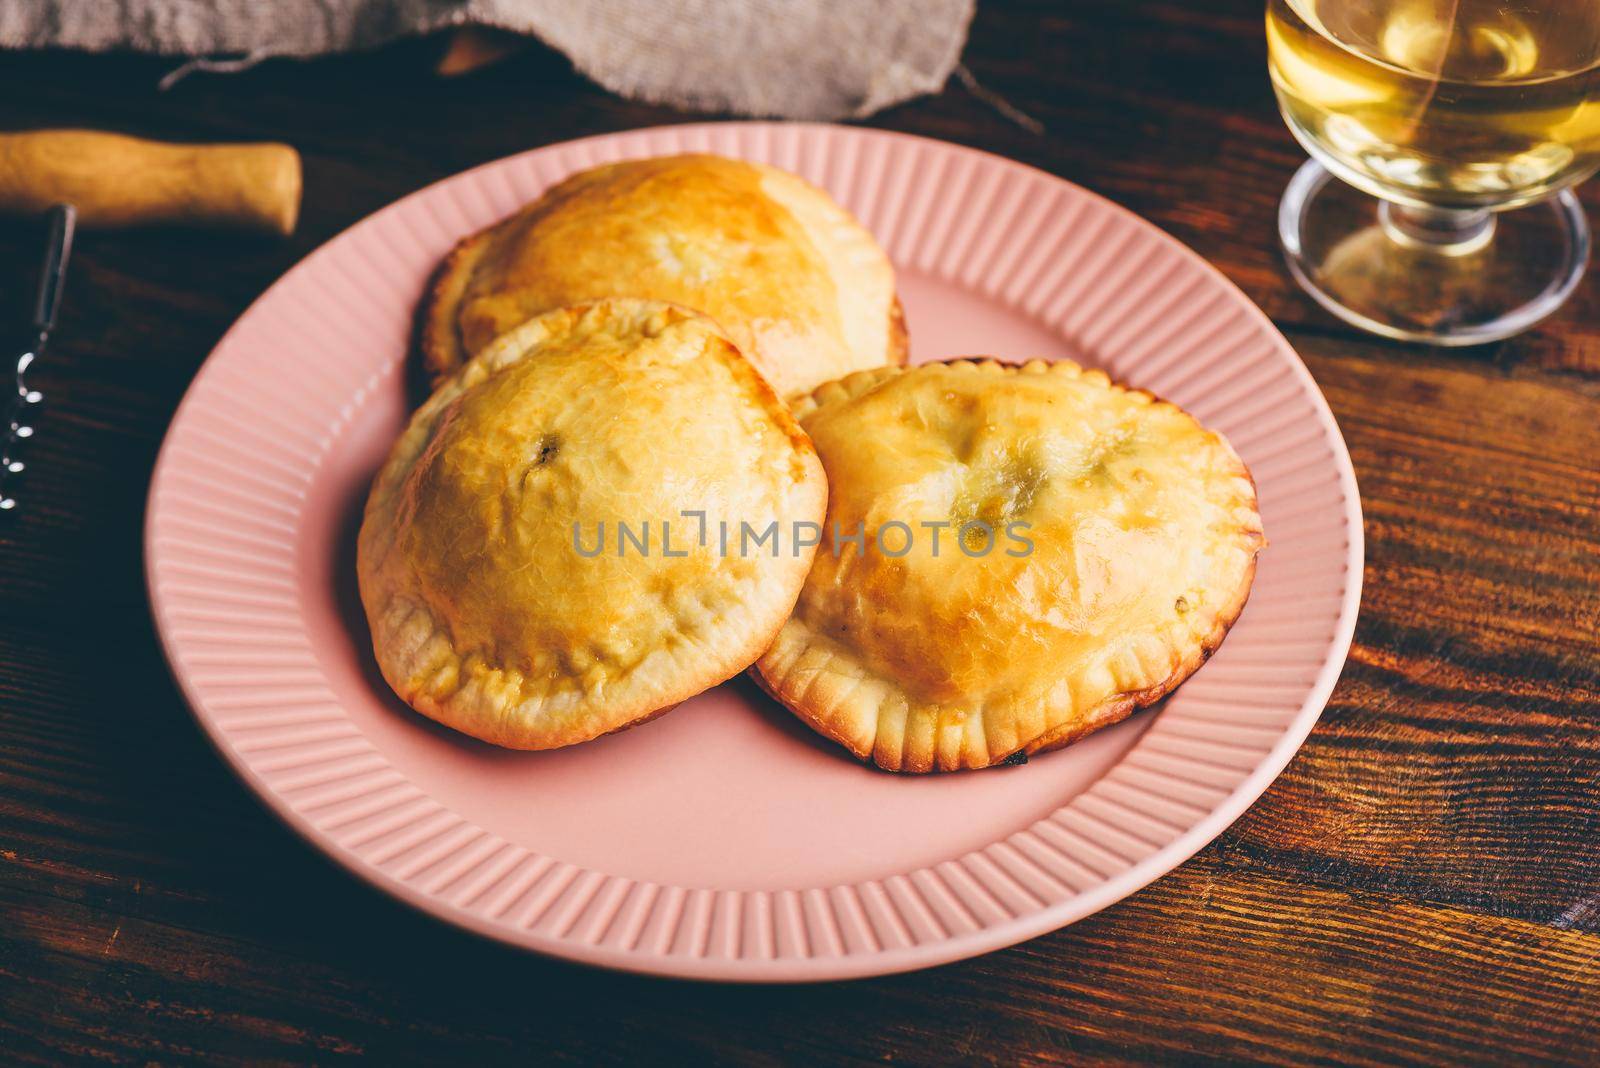 Three Oven Baked Hand Pies Filled with Blue Chives and Mushrooms on Plate with Glass of Wine